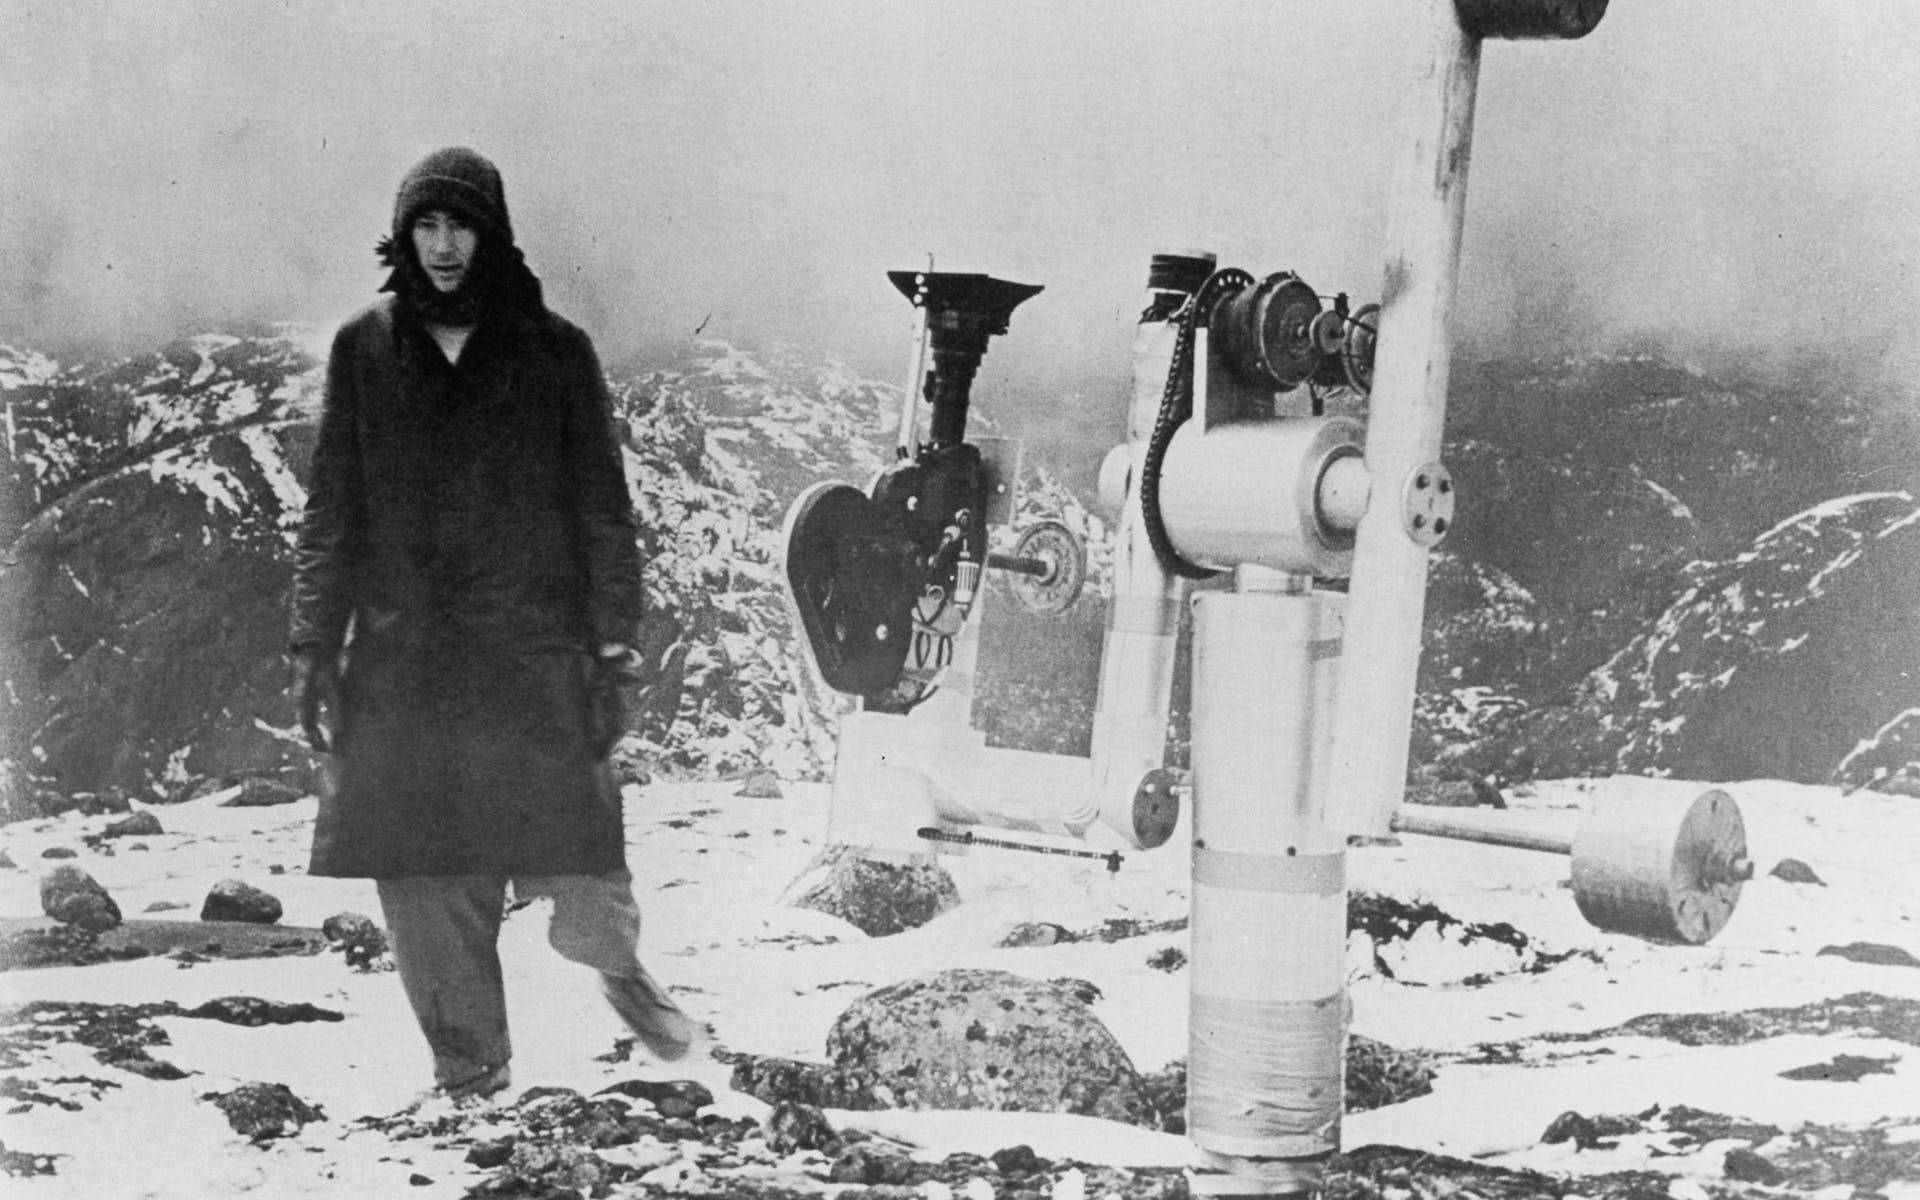 Black and white film still of a man in a foggy snowy mountain top next to a large camera rig